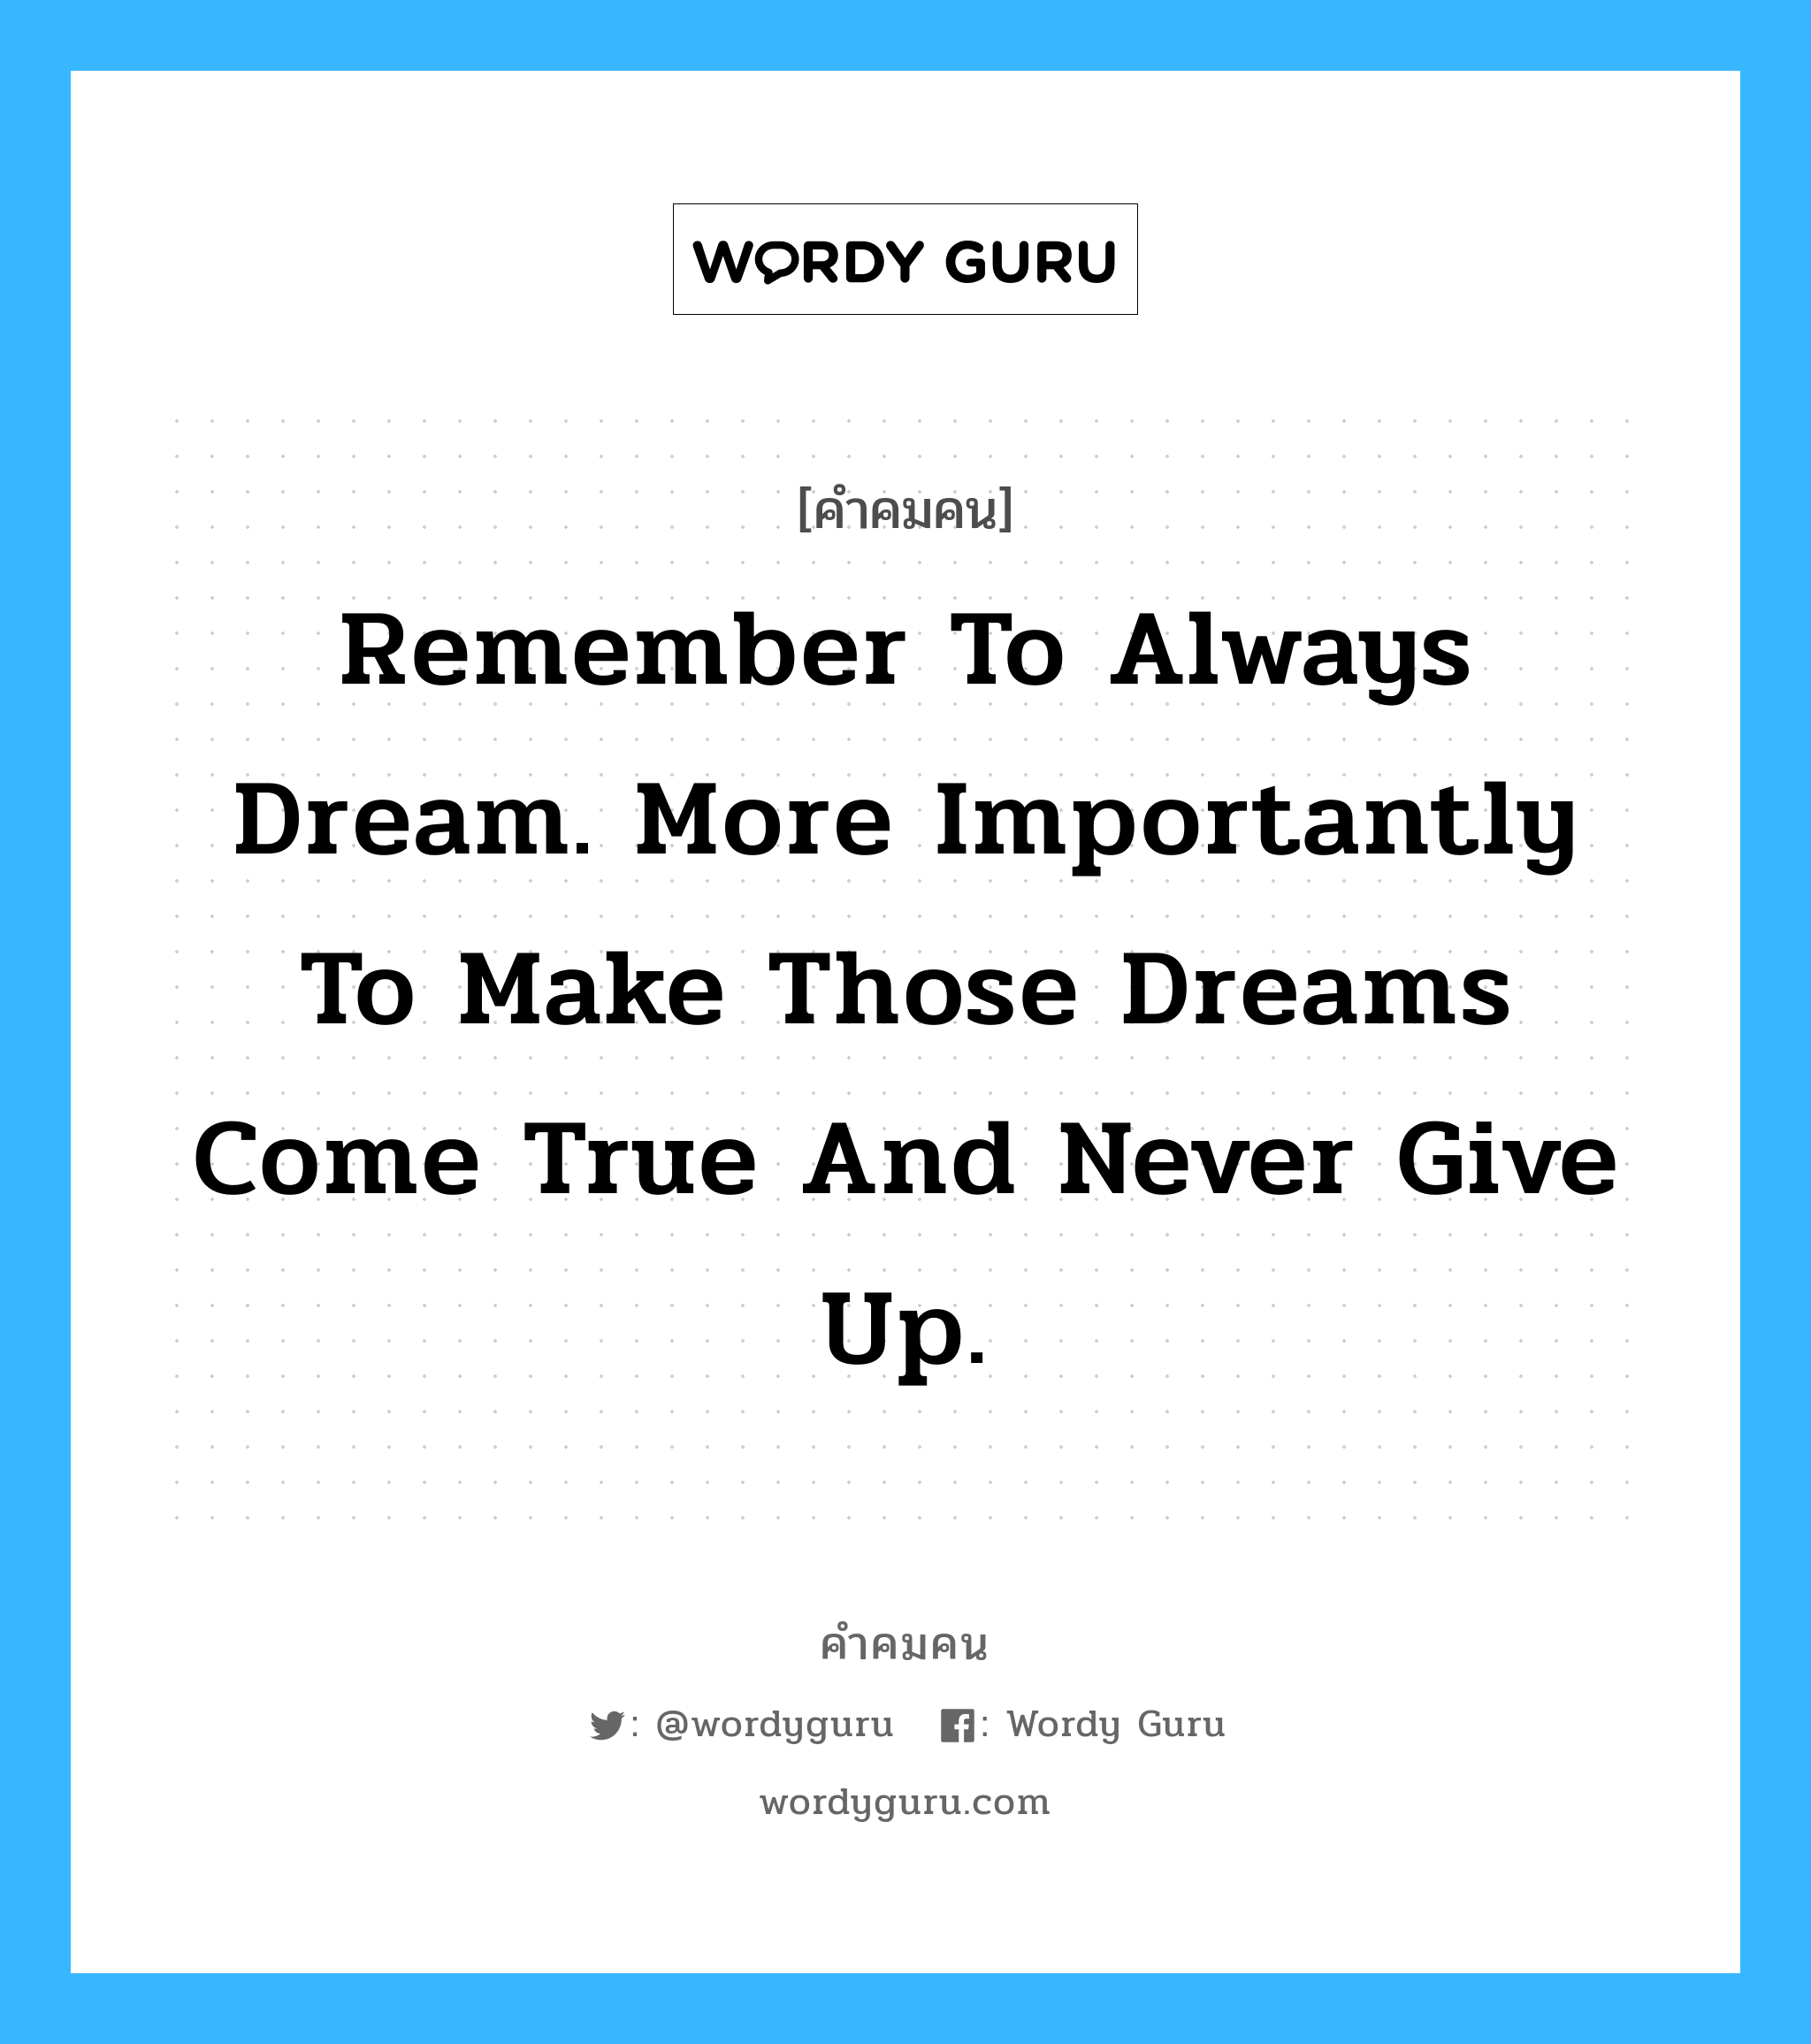 Remember to always dream. More importantly to make those dreams come true and never give up., คำคมคน Remember to always dream. More importantly to make those dreams come true and never give up. จงฝันอยู่เสมอ ที่สำคัญมากไปกว่านั้นคือ ทำความฝันนั้นให้เป็นความจริง และอย่ายอมแพ้ Dr. Robert D. Ballard หมวด Dr. Robert D. Ballard